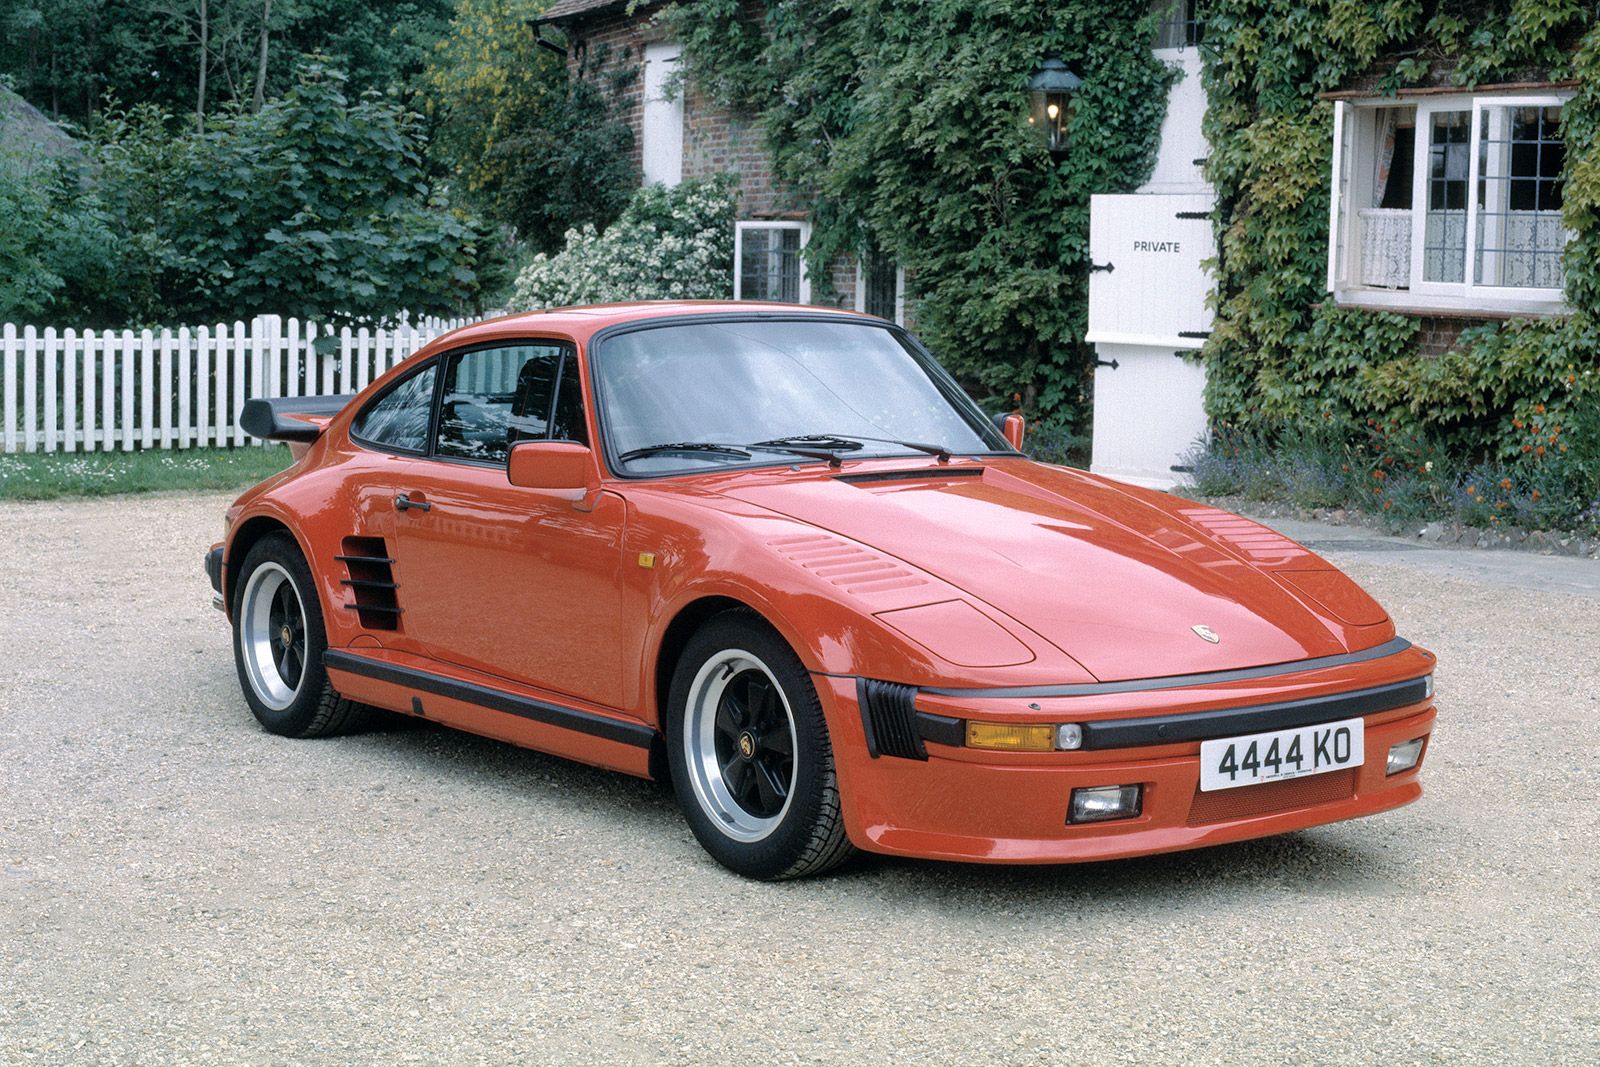 Porsche 911: 8 Reasons Why It's the Greatest Sports Car Ever